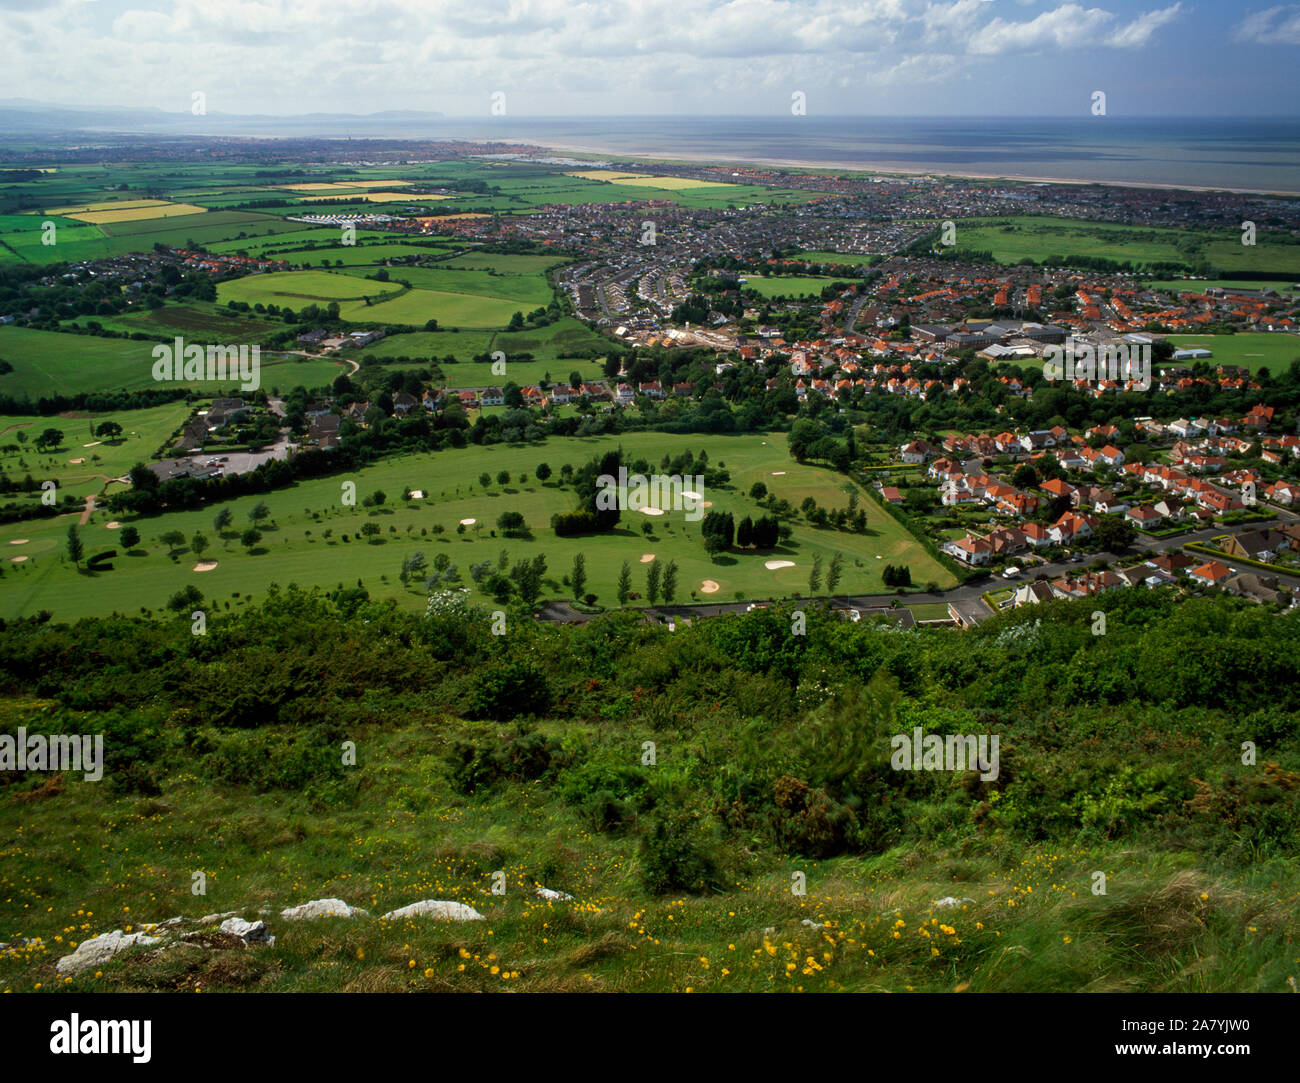 View west from Offa's Dyke path along the North Wales coast, over the Golf course and suburbs of Prestatyn, Denbighshire, North Wales. Stock Photo